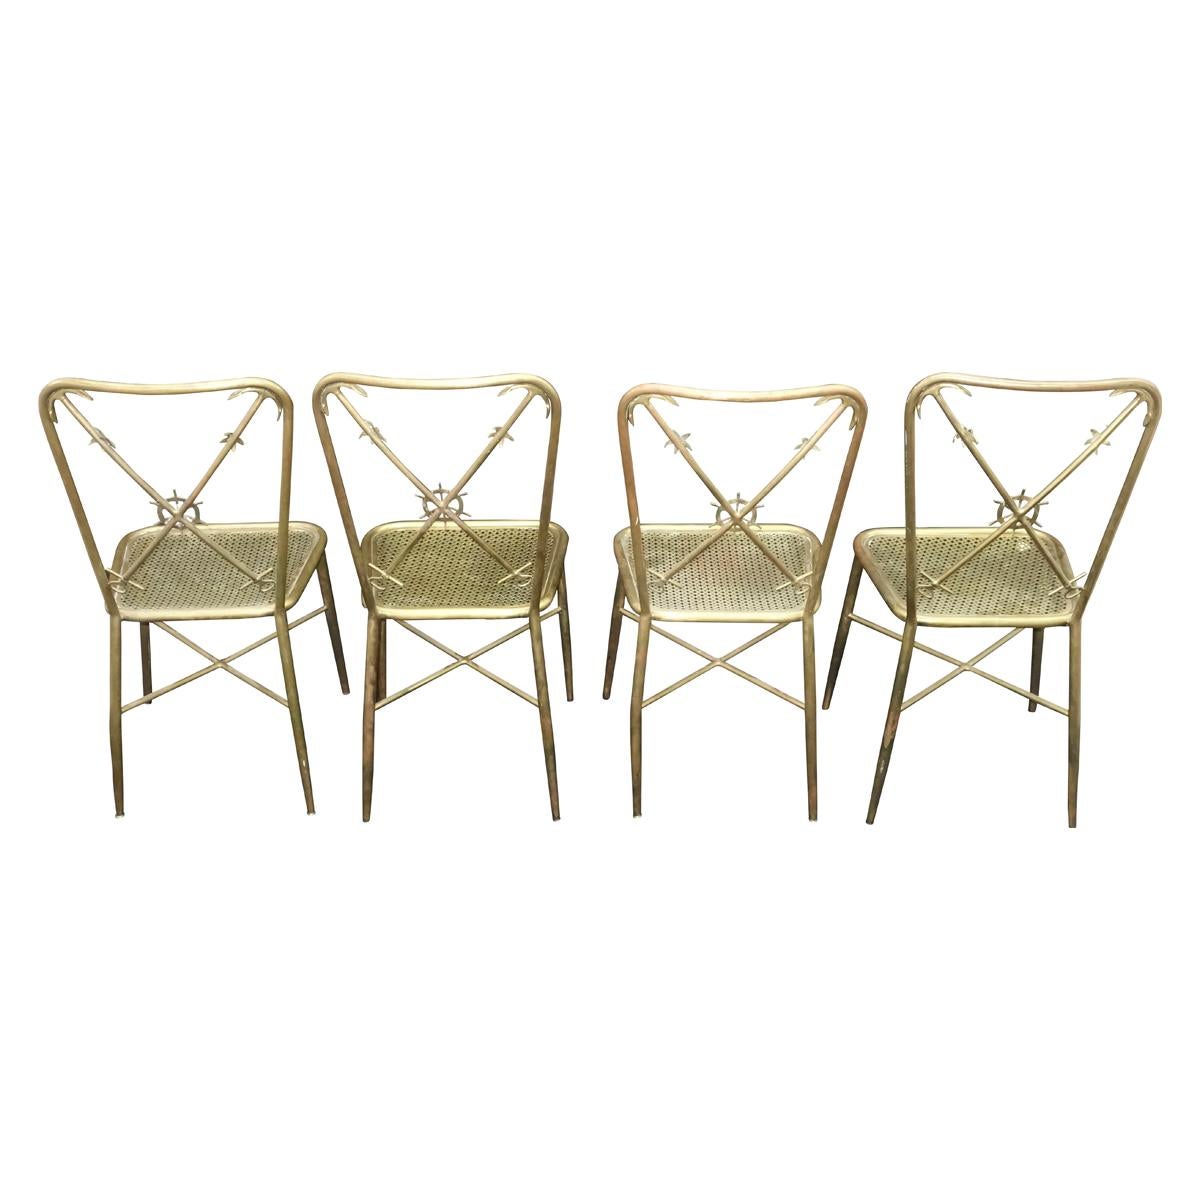 Elegant brass Italian nautical theme side or dining chairs in the manner of Gio Ponti. The backrest has 2 anchor crossbars with a ship wheel motif in the center. The metal seat is reminiscent of the texture used by Mathieu Mategot in his designs.